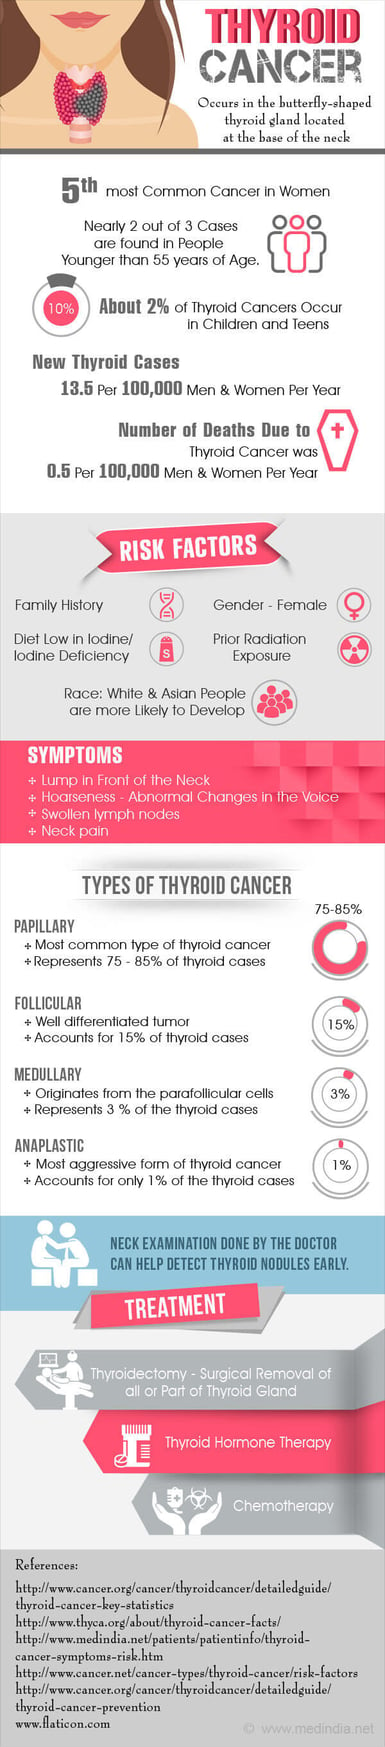 Thyroid cancer infographic breaking down important information about diagnosis, prognosis, and peer reviewed studies of the disease